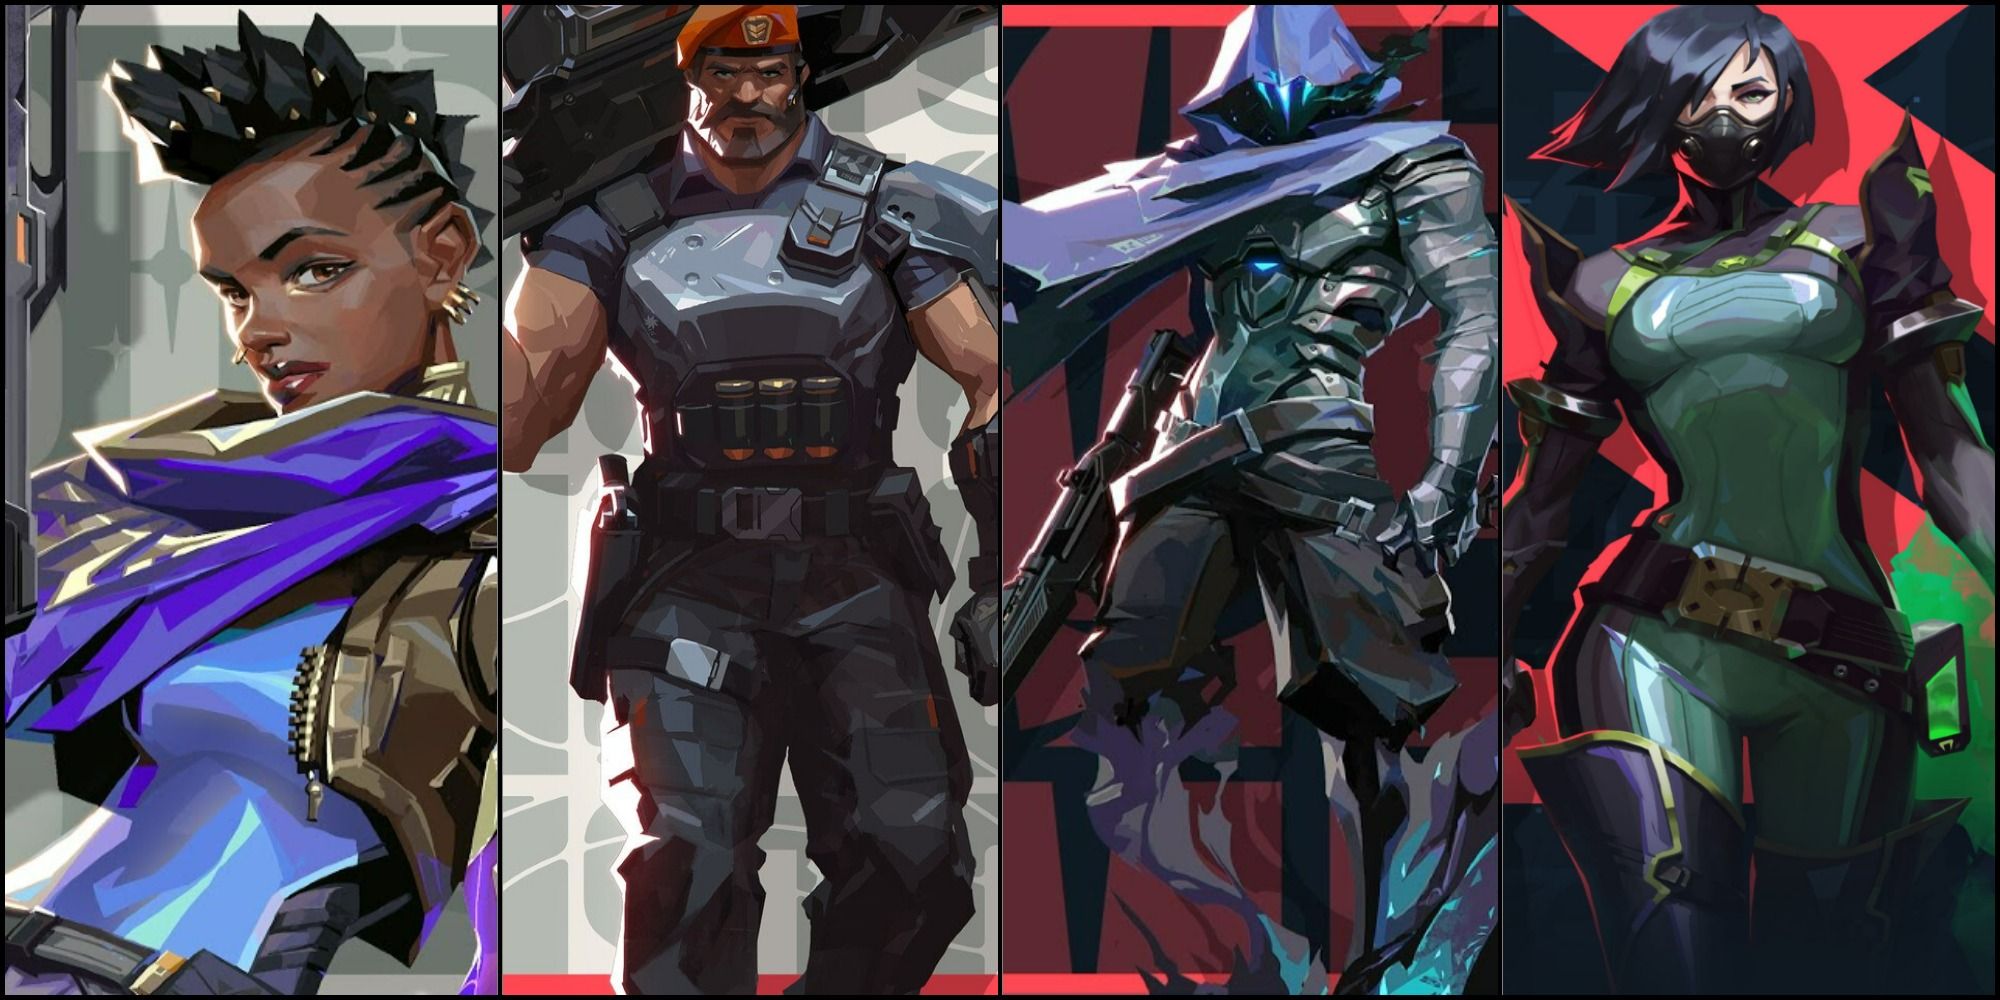 Valorant feature image including all controller agents. From left to right: Astra, Brimstone, Omen and Astra